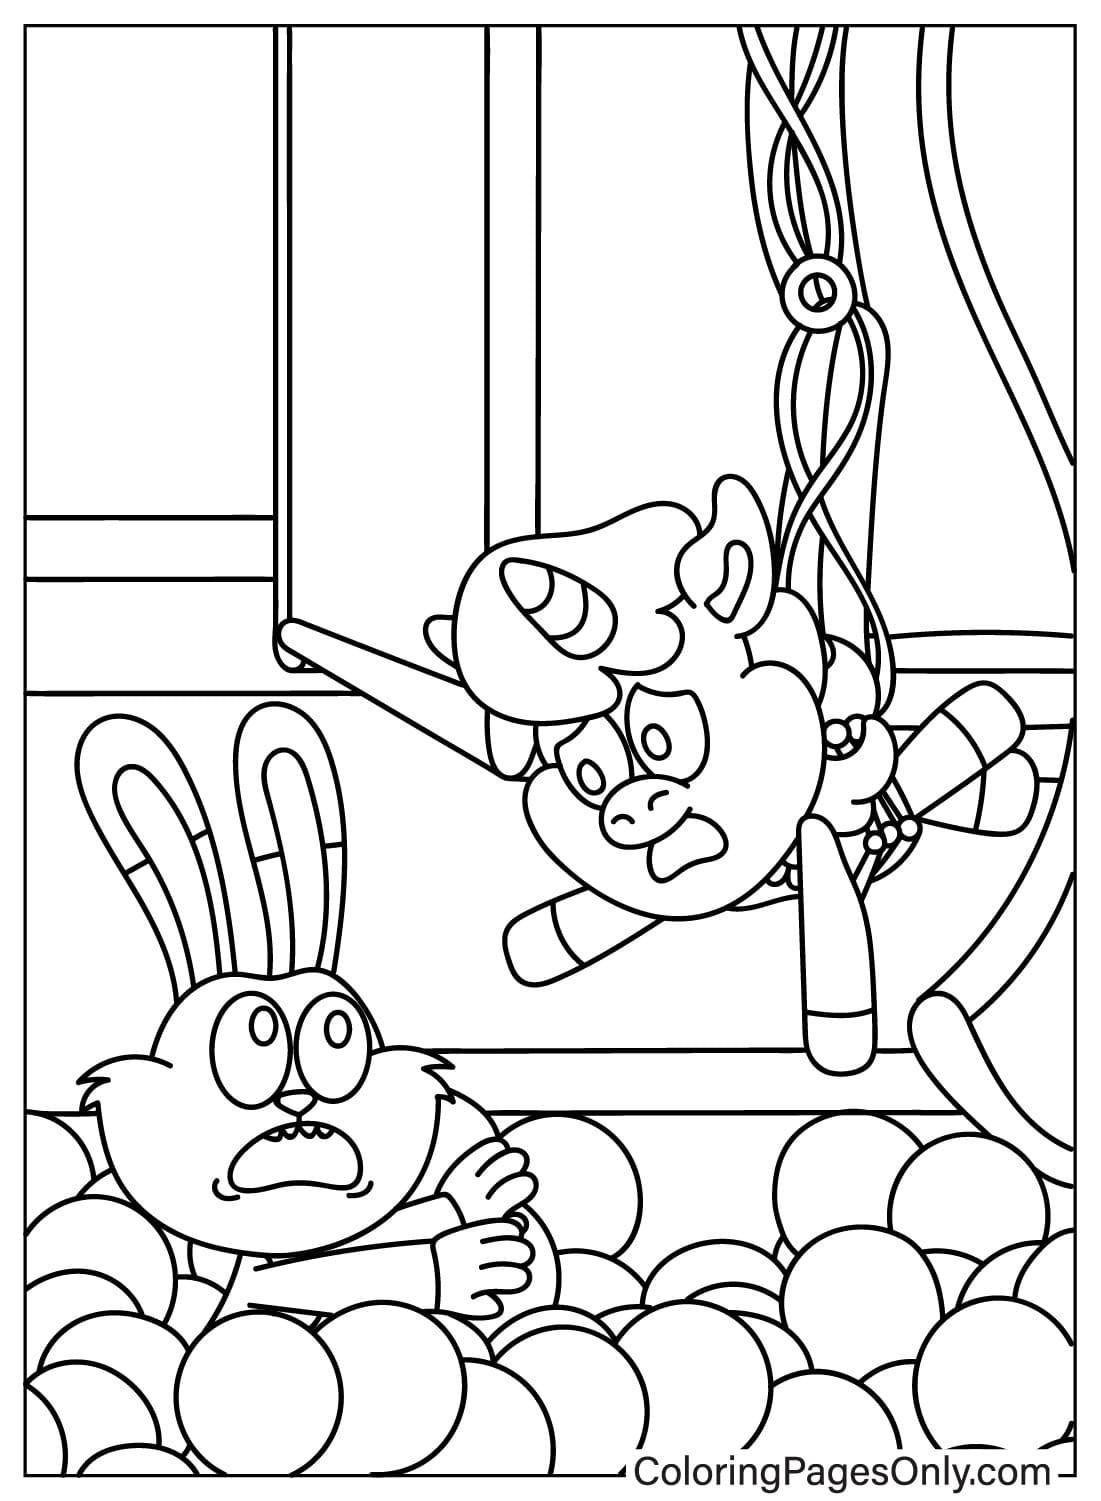 CraftyCorn with Hoppy Hopscotch Coloring Page from CraftyCorn